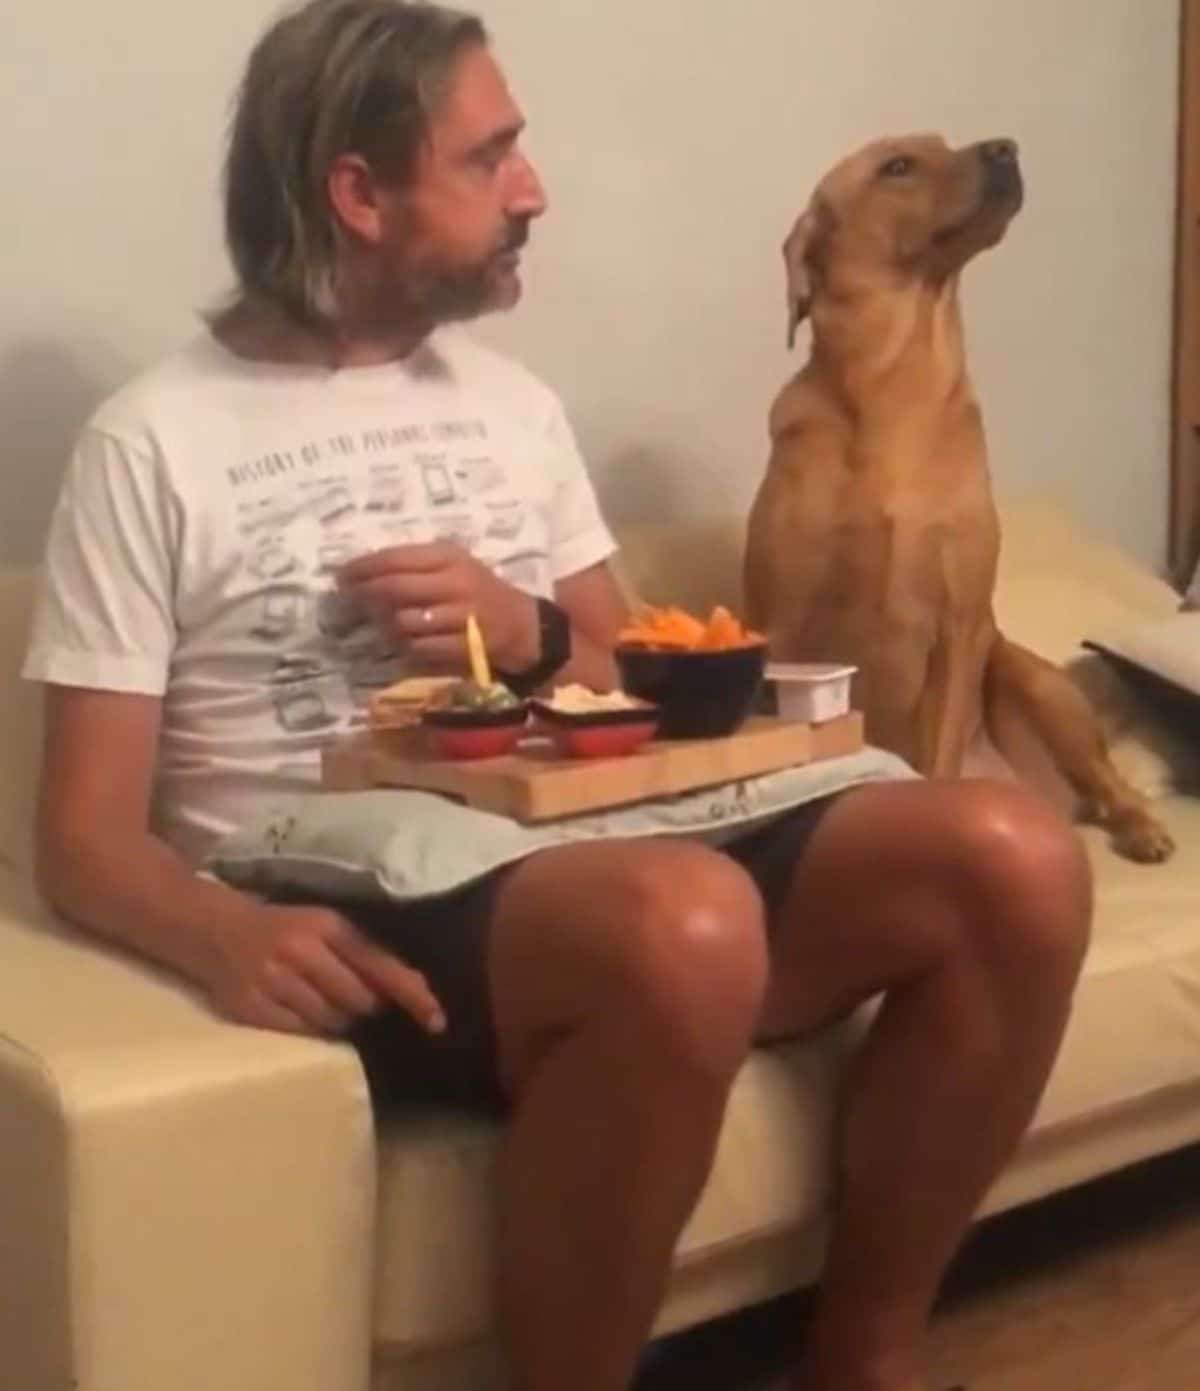 brown dog sitting next to a man with food on his lap and the dog is looking away